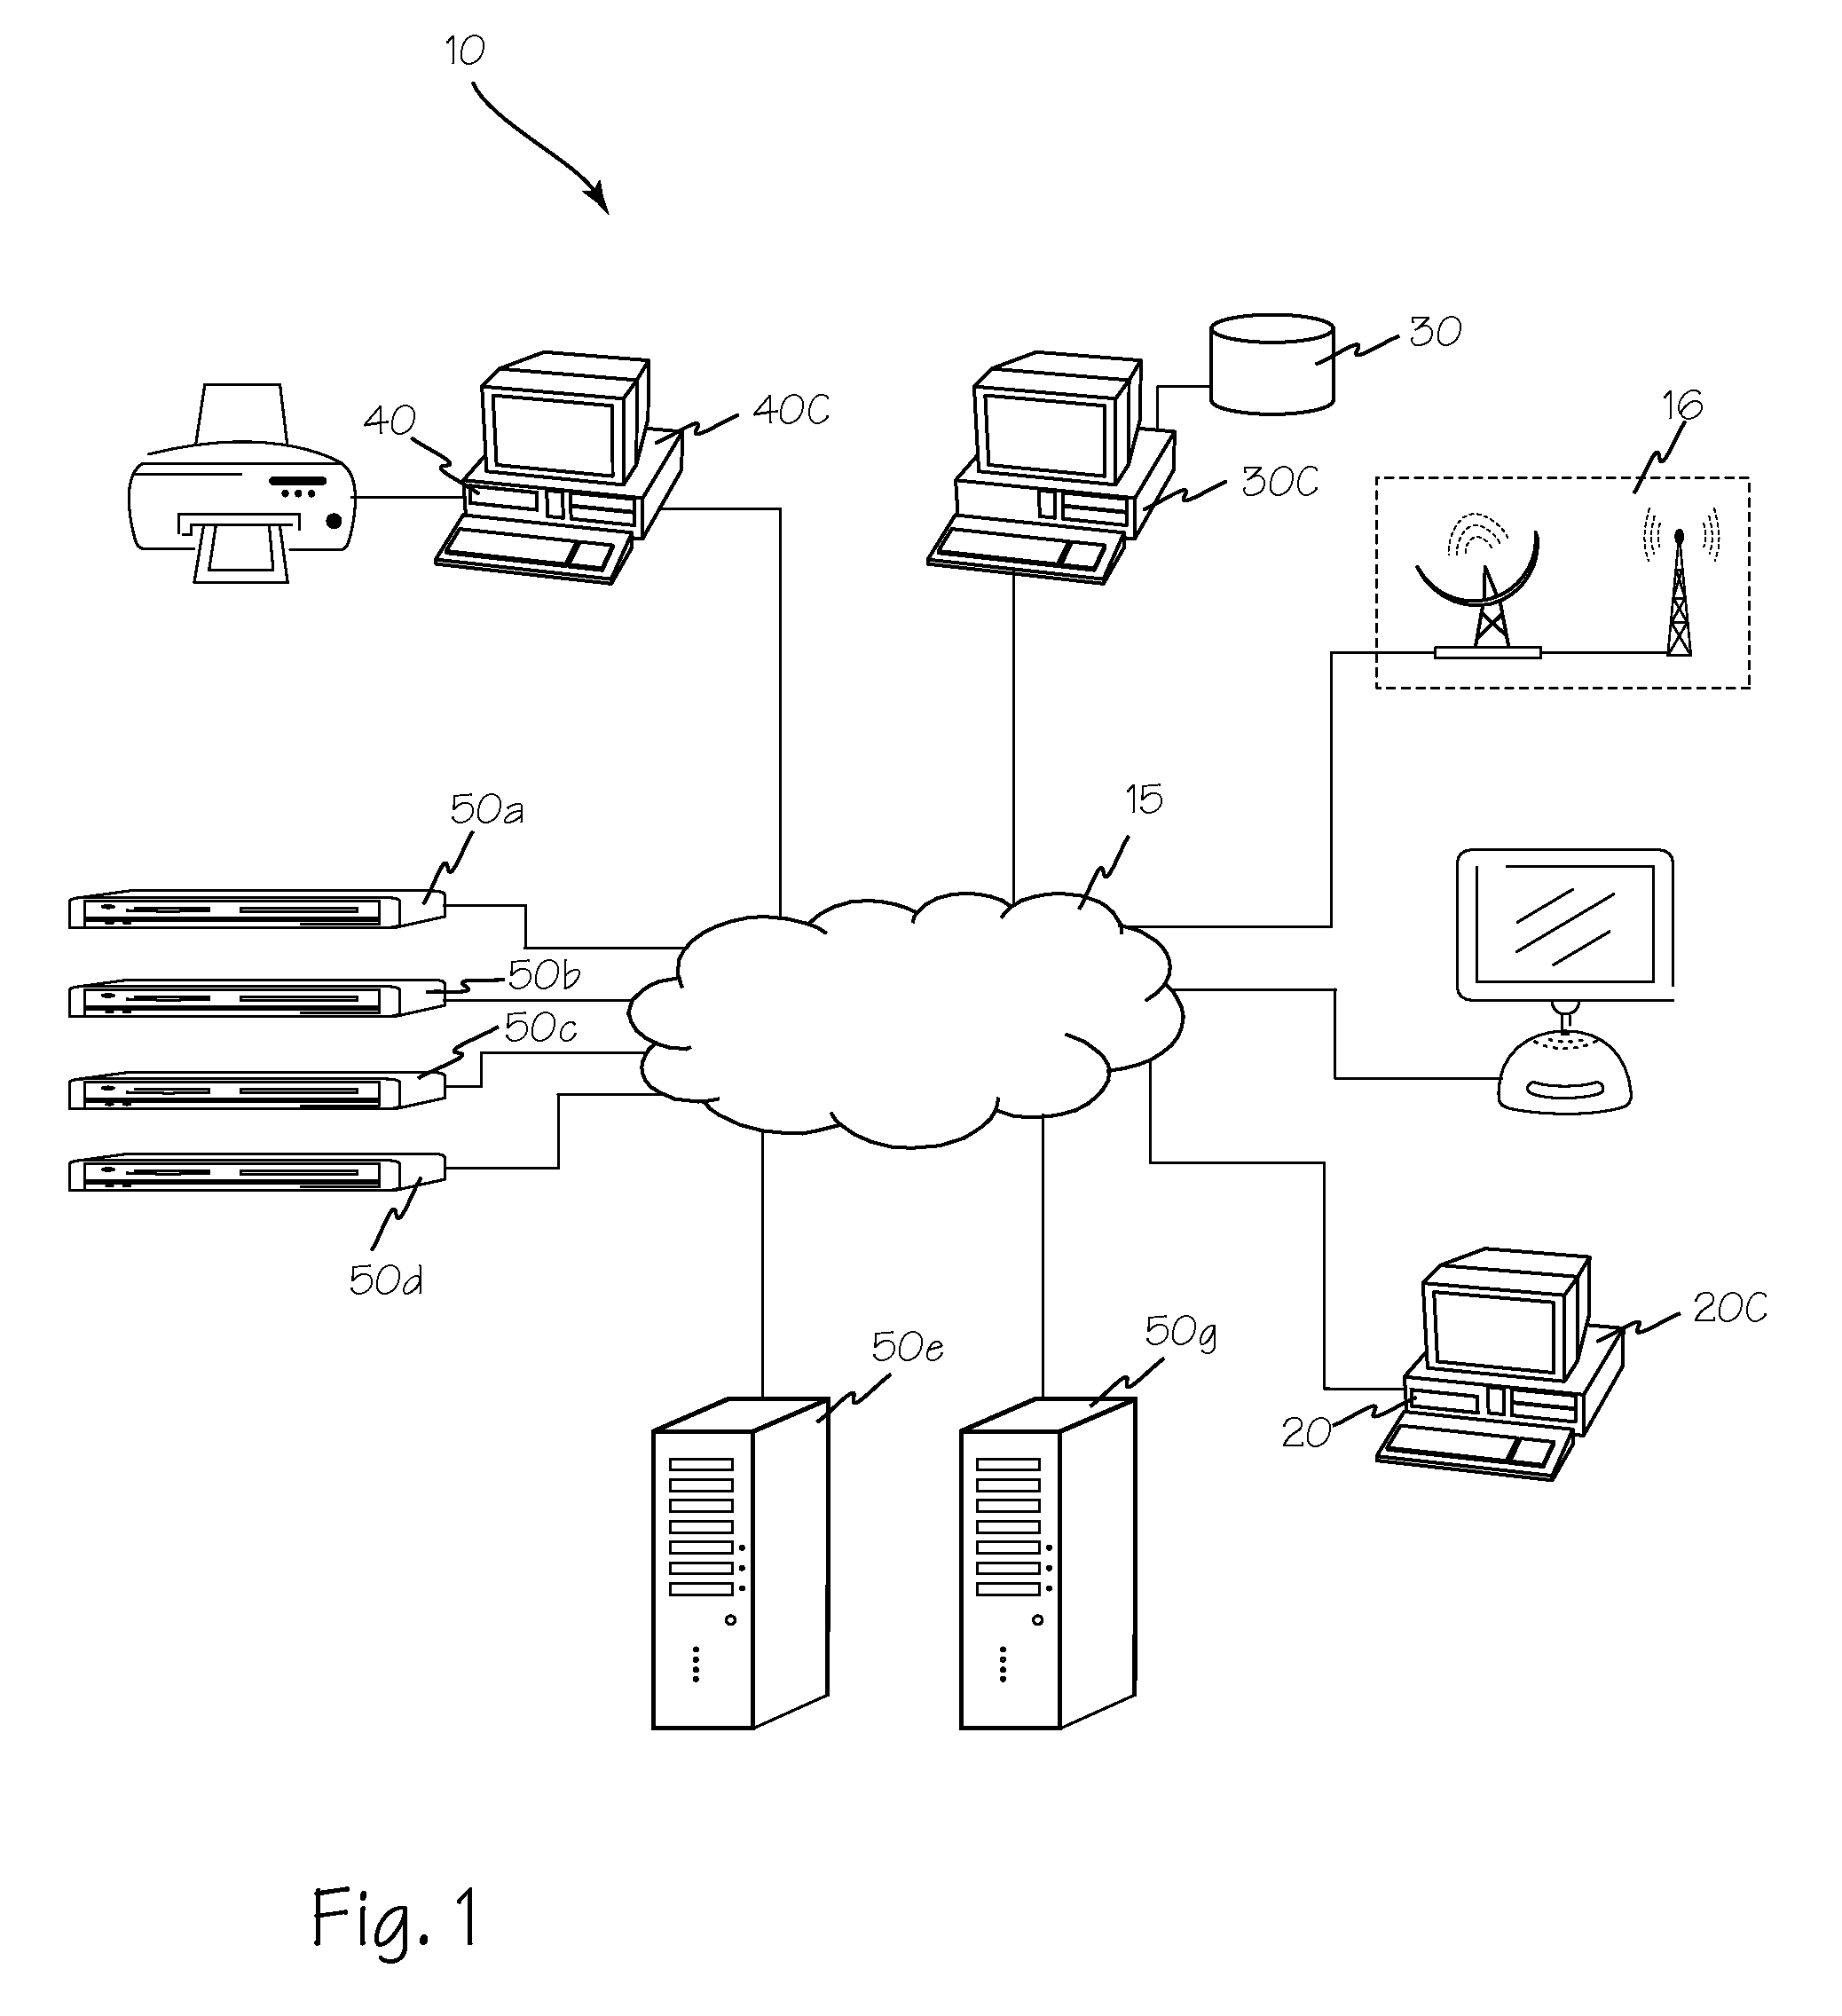 Method and Apparatus for Monitoring Network Servers